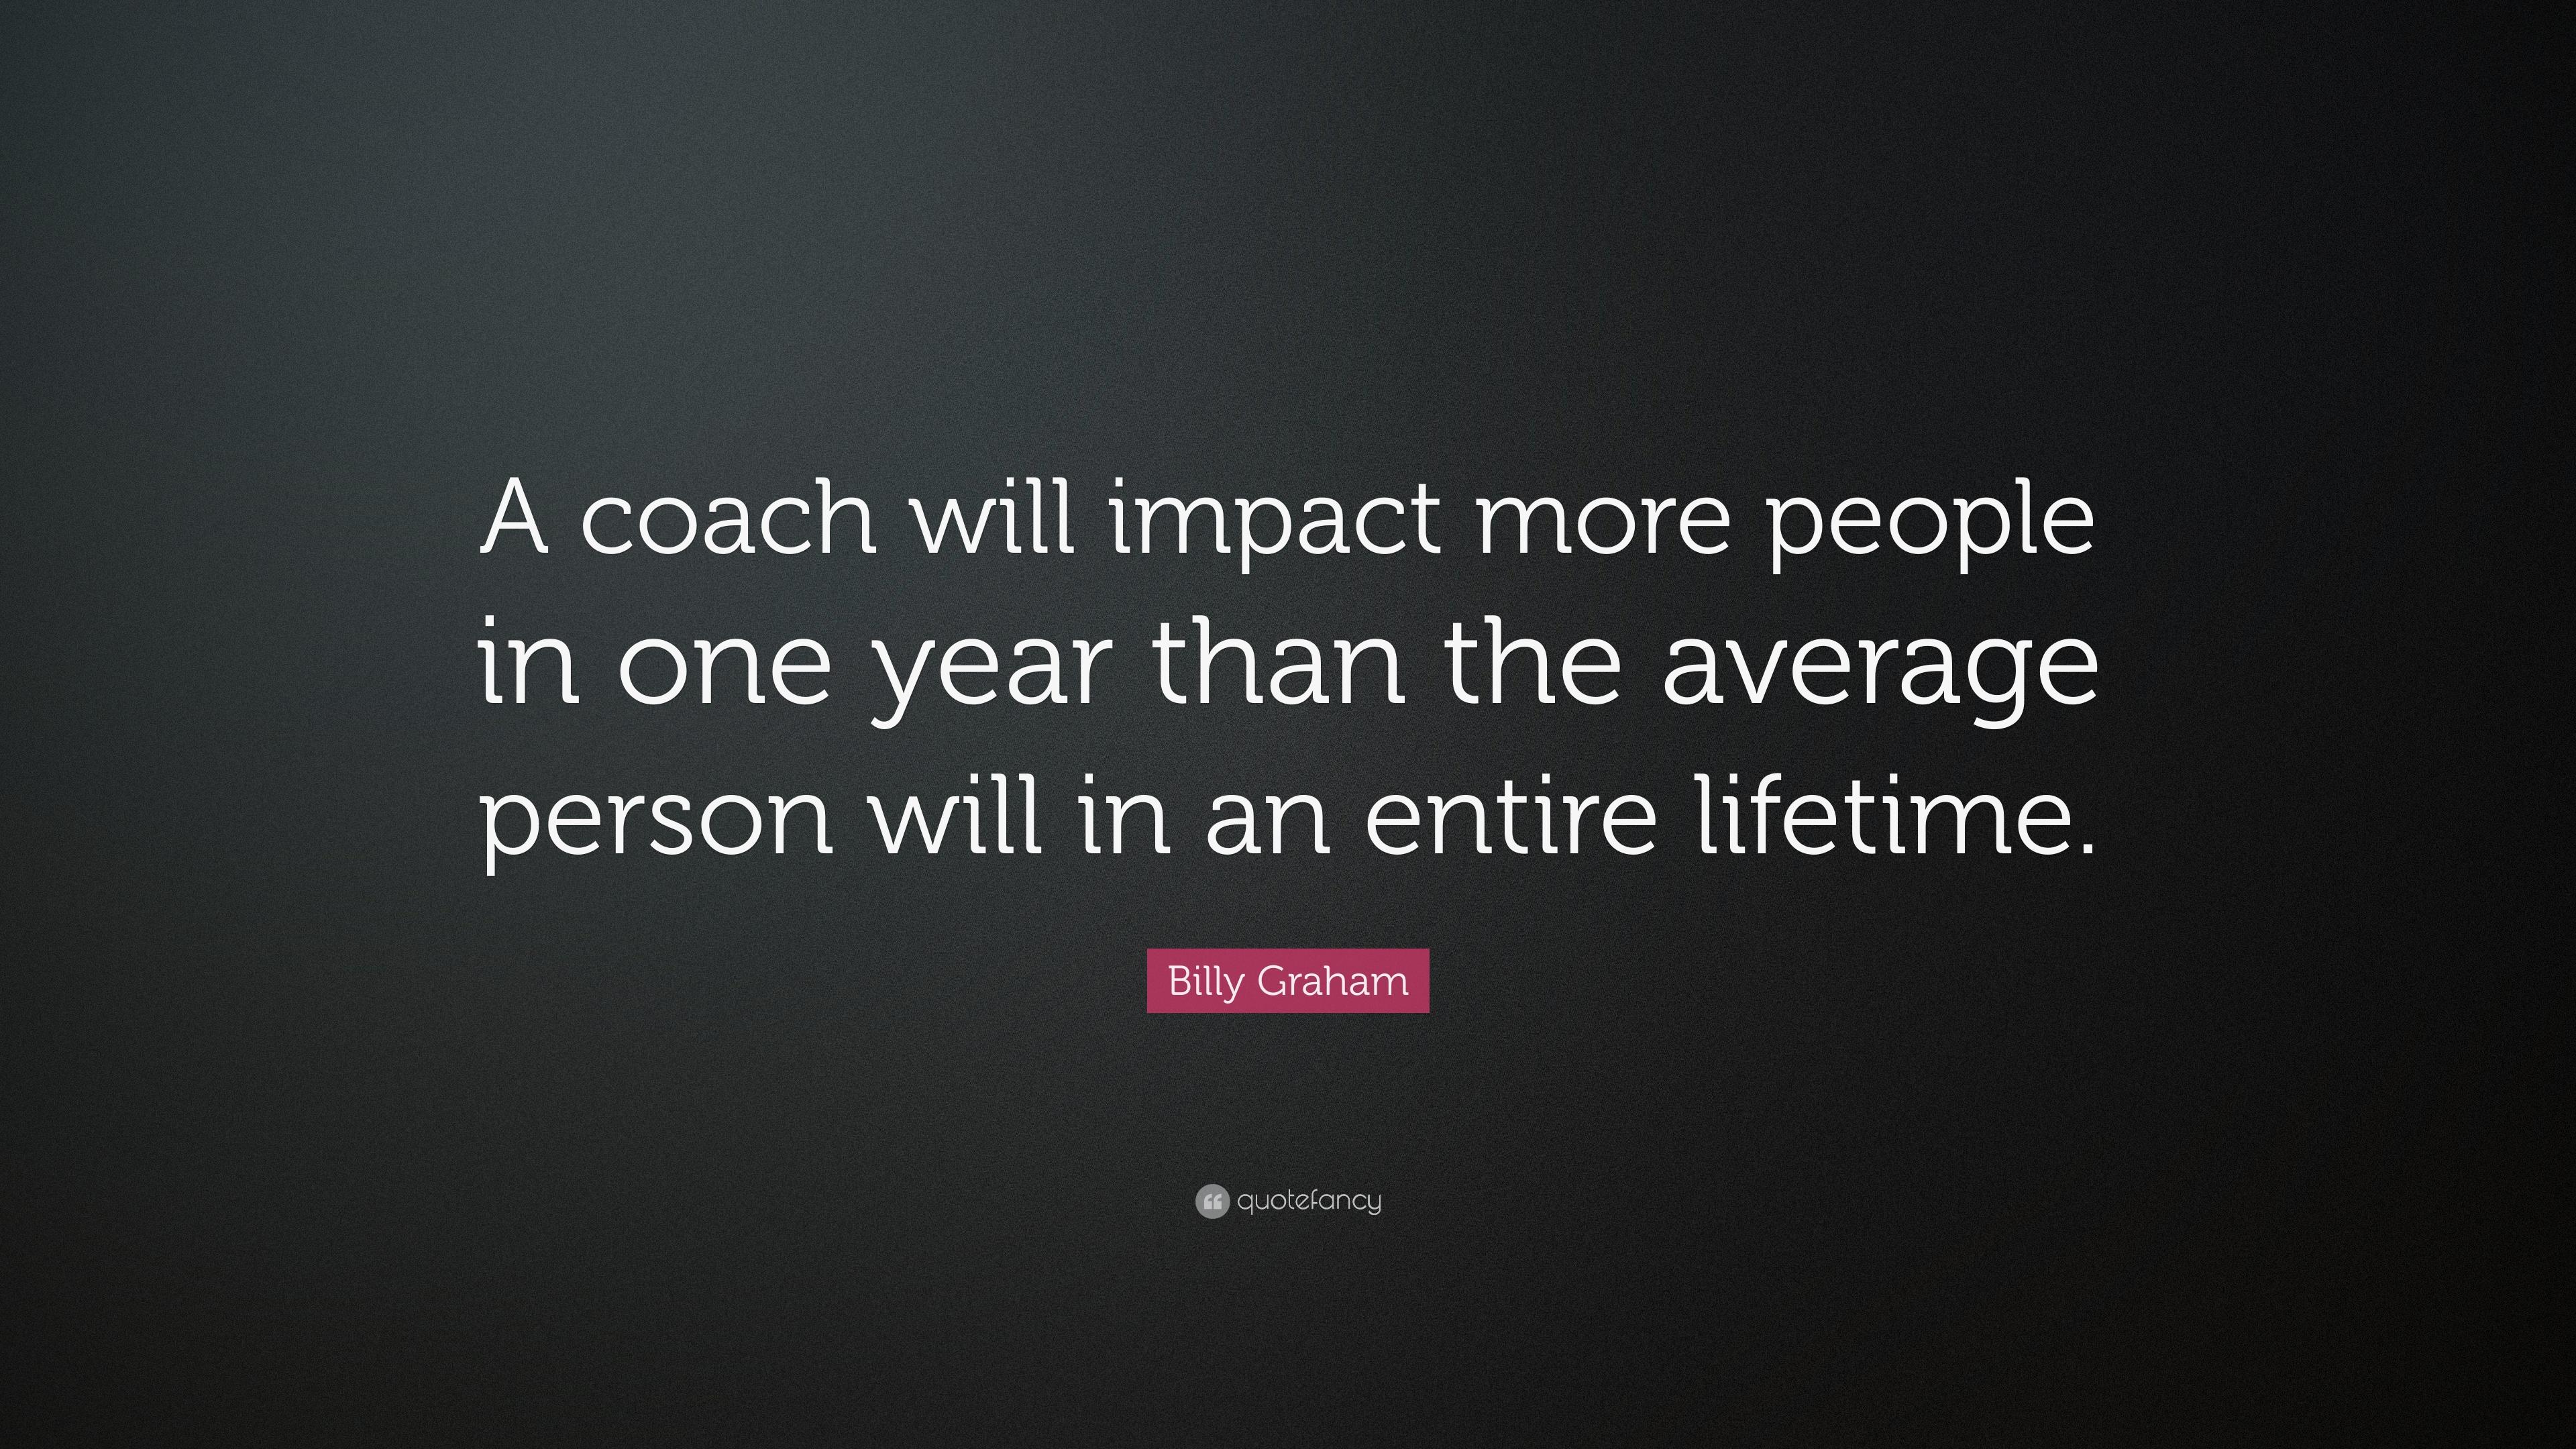 Billy Graham Quote: “A coach will impact more people in one year